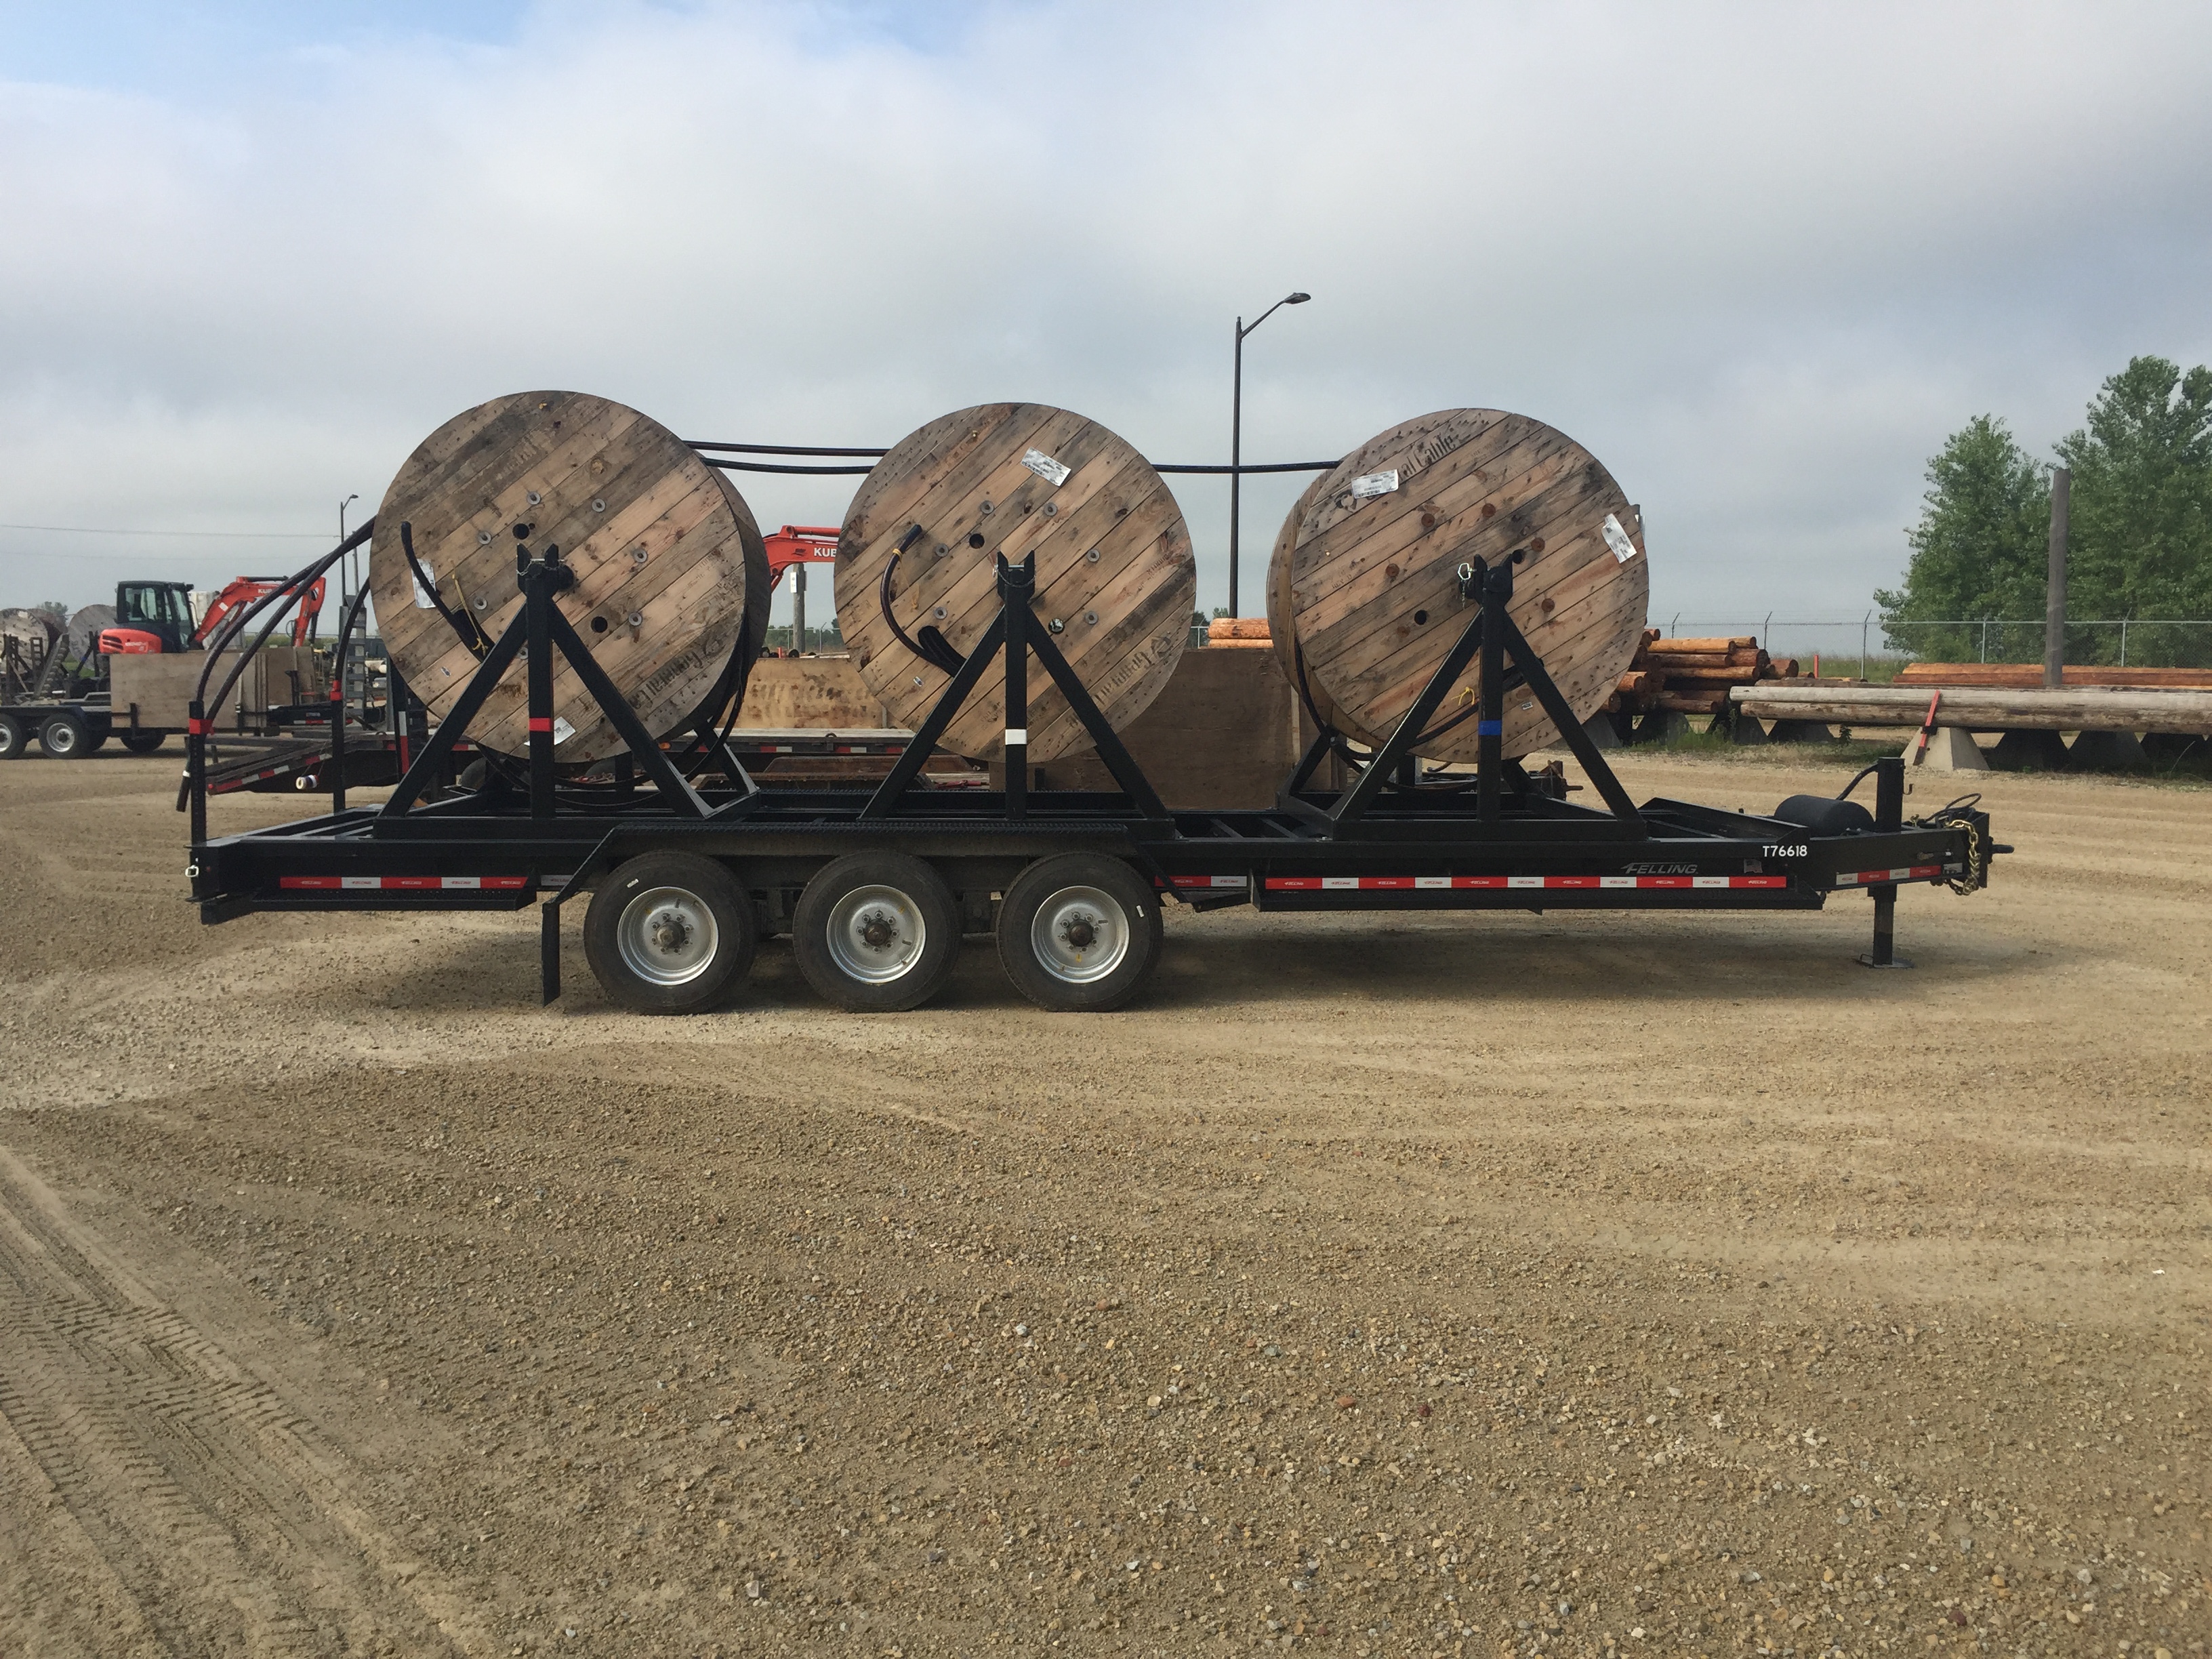 Felling's Triple Reel Trailer is Cooperative's Cable Deployment